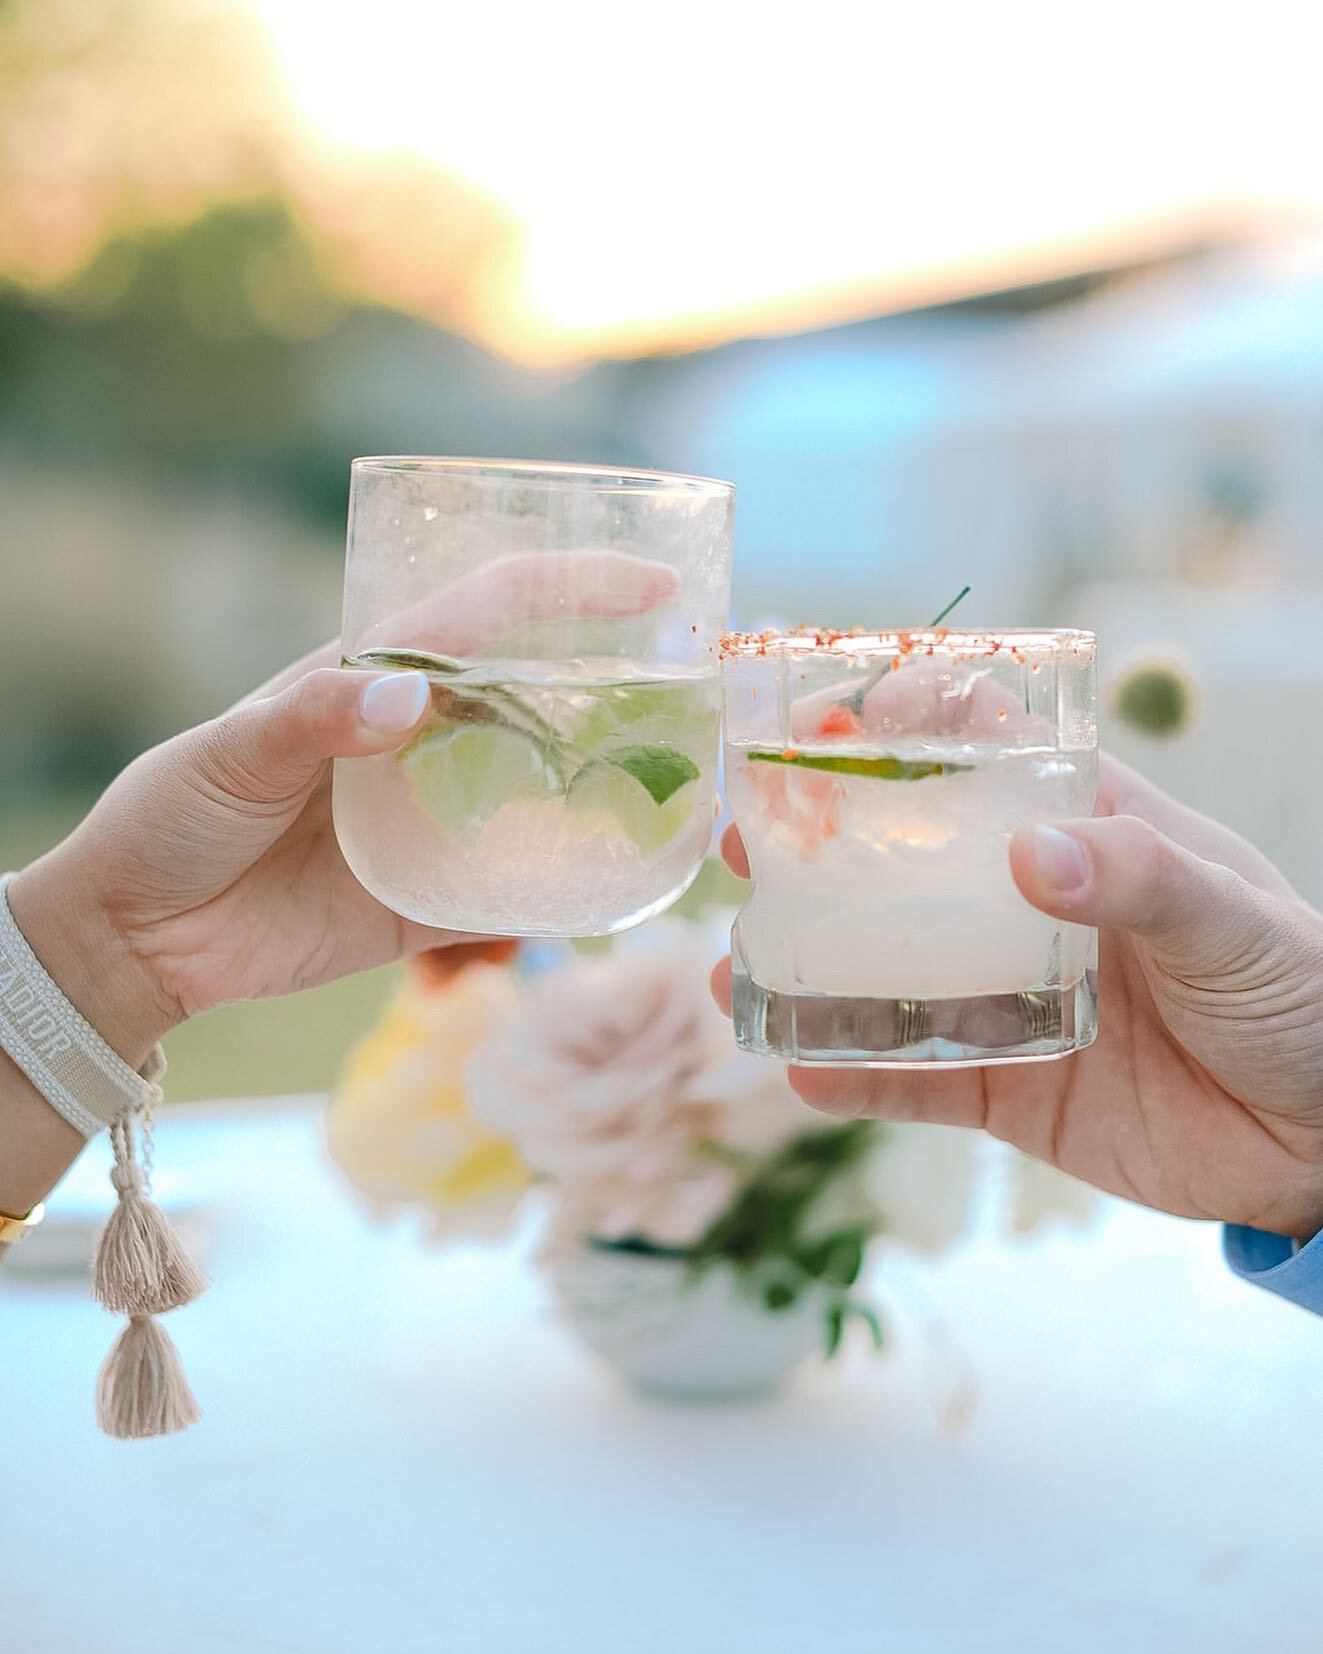 Cheers to the start of a beautiful weekend and to deliciously curated cocktails!
⠀⠀⠀⠀⠀⠀⠀⠀⠀
Venue LBJ Wildflower Centet
Photographer @graciebyrdjones 
Glassware @tablemannerstx 
Caterer @cravecateringtx 
Floral @clementine.botanical.art